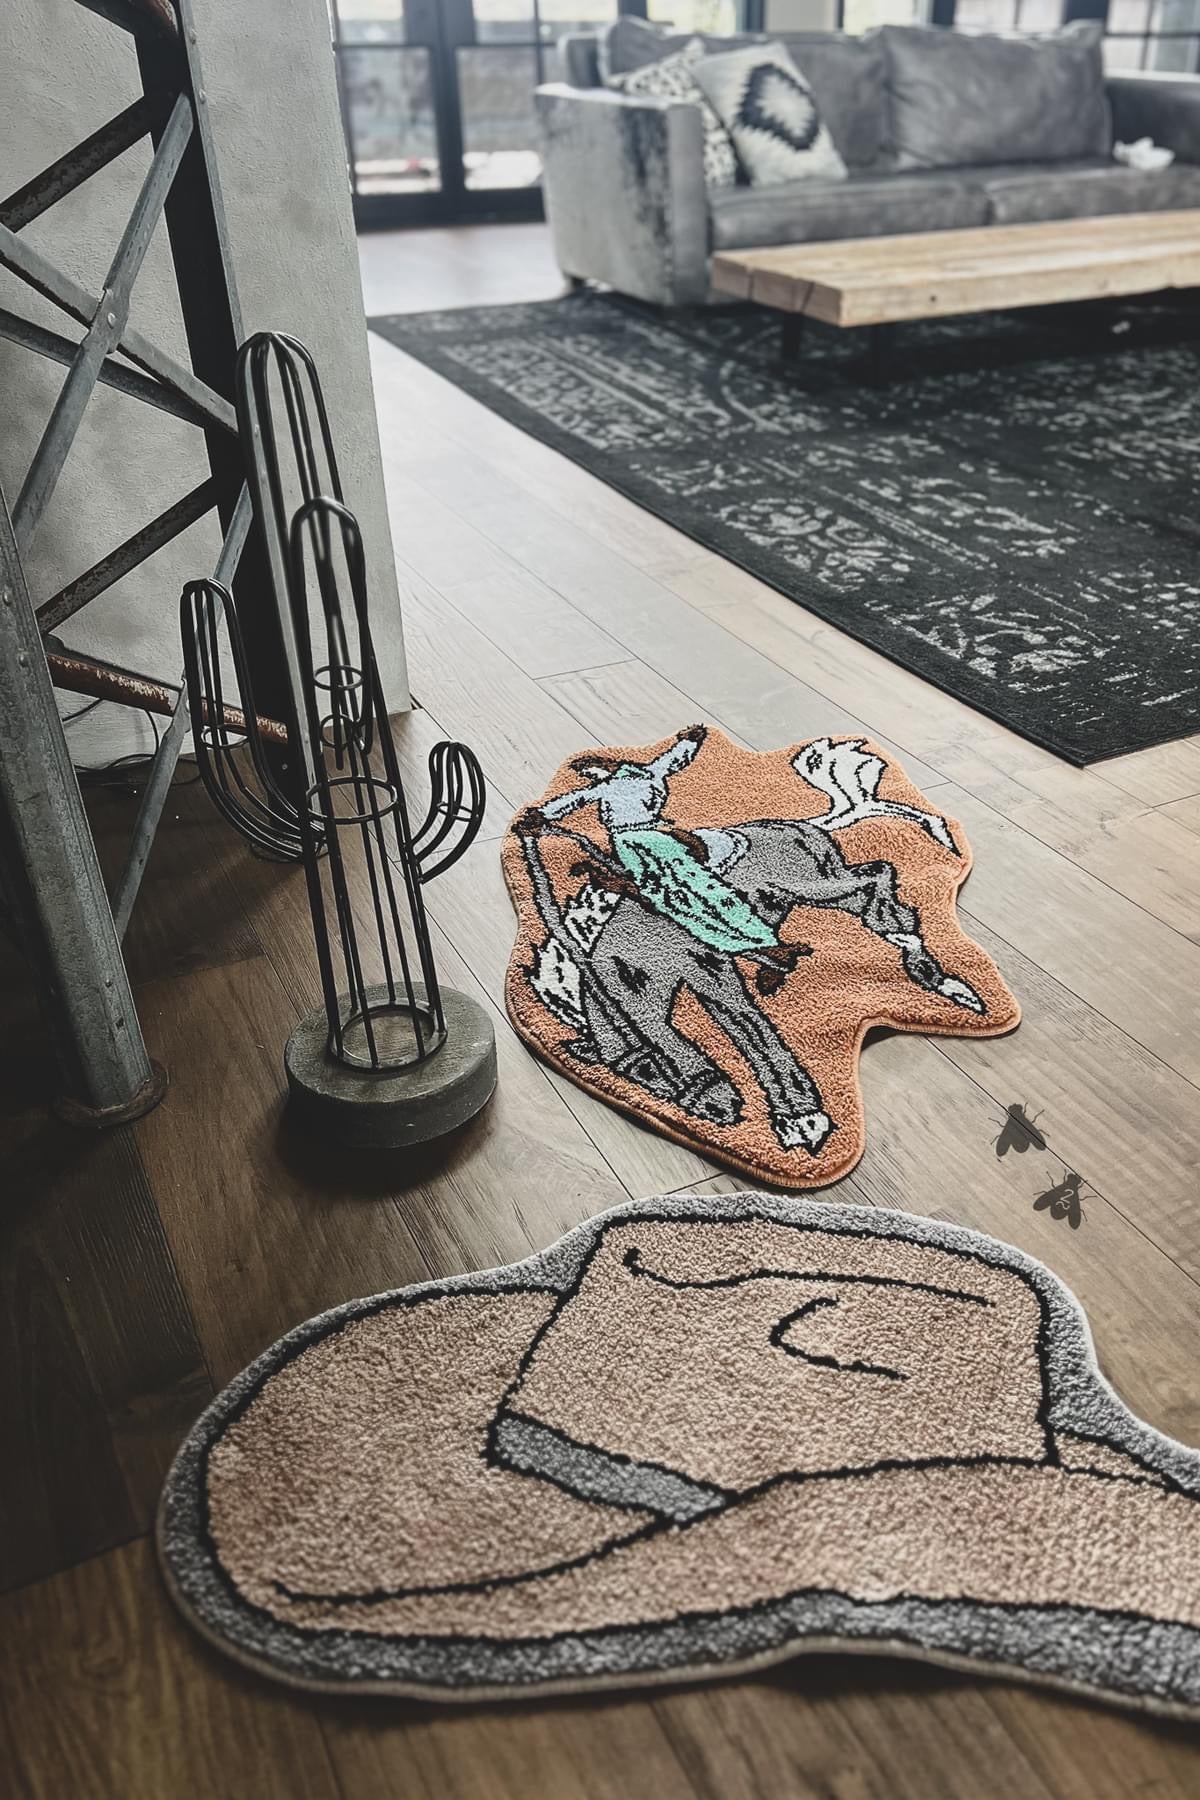 Rodeo Rug - Bronc Buster